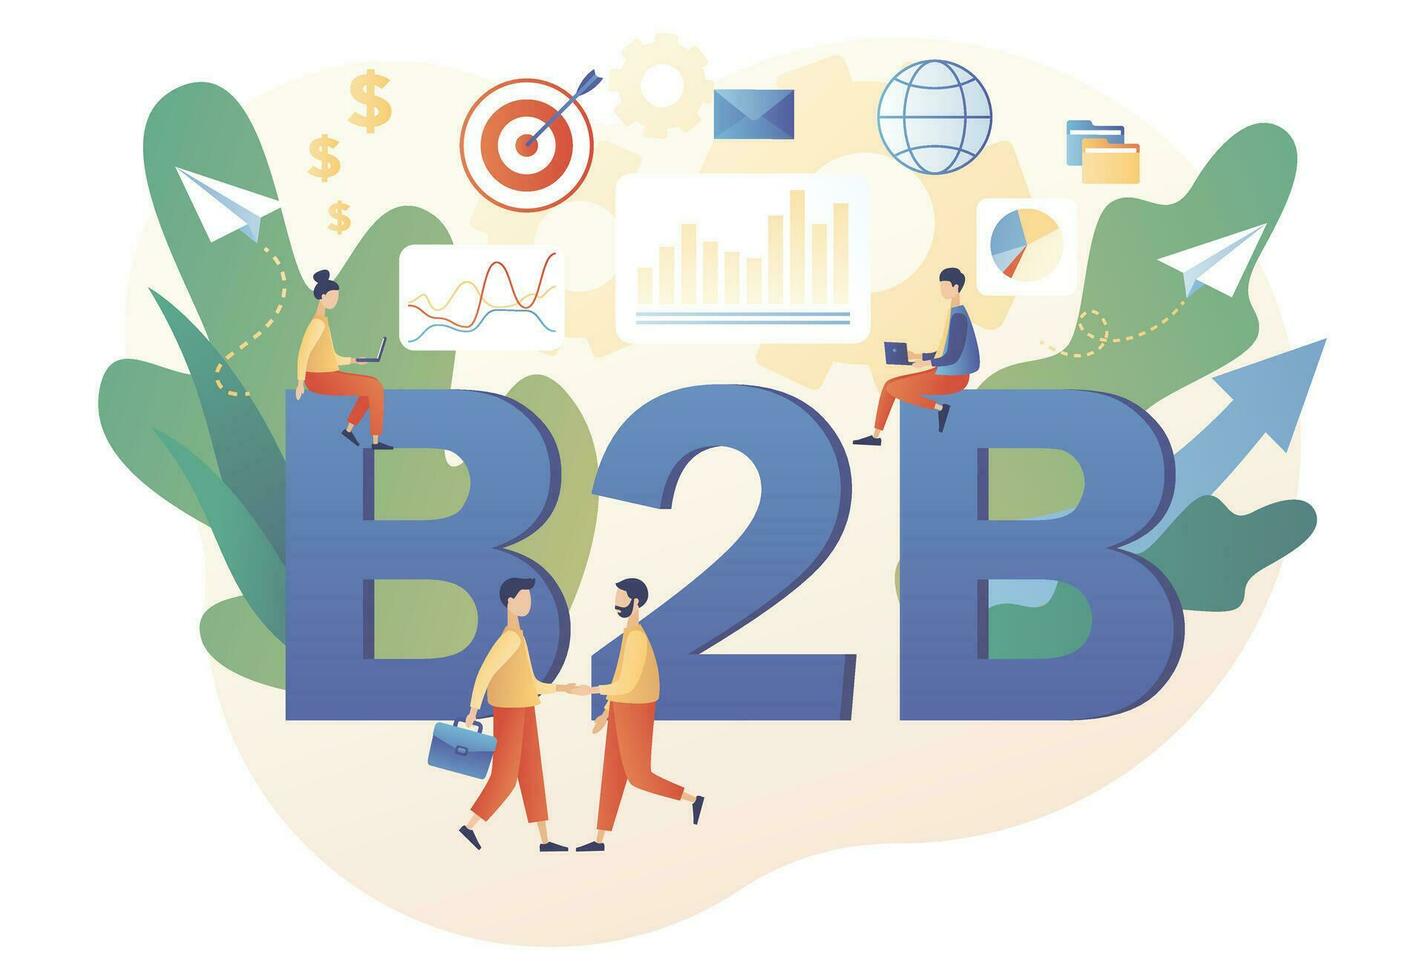 B2B. Business to business - big text. Tiny businessmen enter into agreement. Successful business collaboration. Marketing strategy, commerce. Modern flat cartoon style. Vector illustration